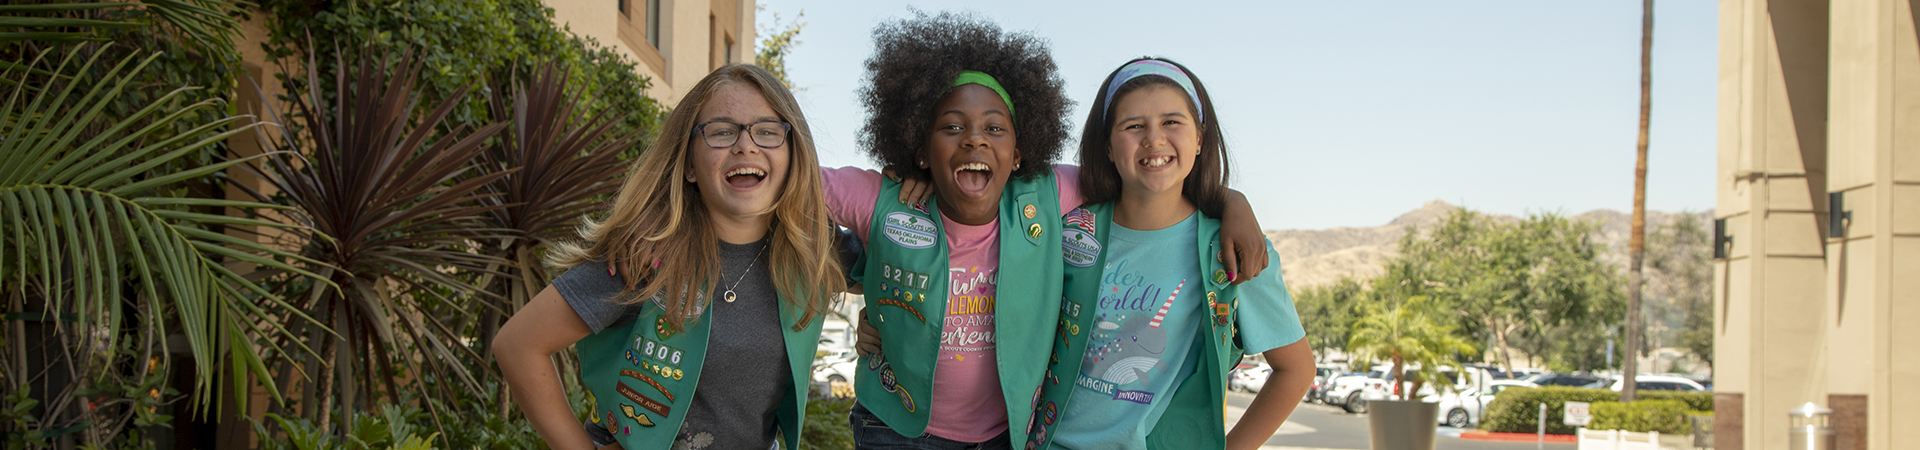  Three Girl Scout Juniors stand arm in arm smiling  